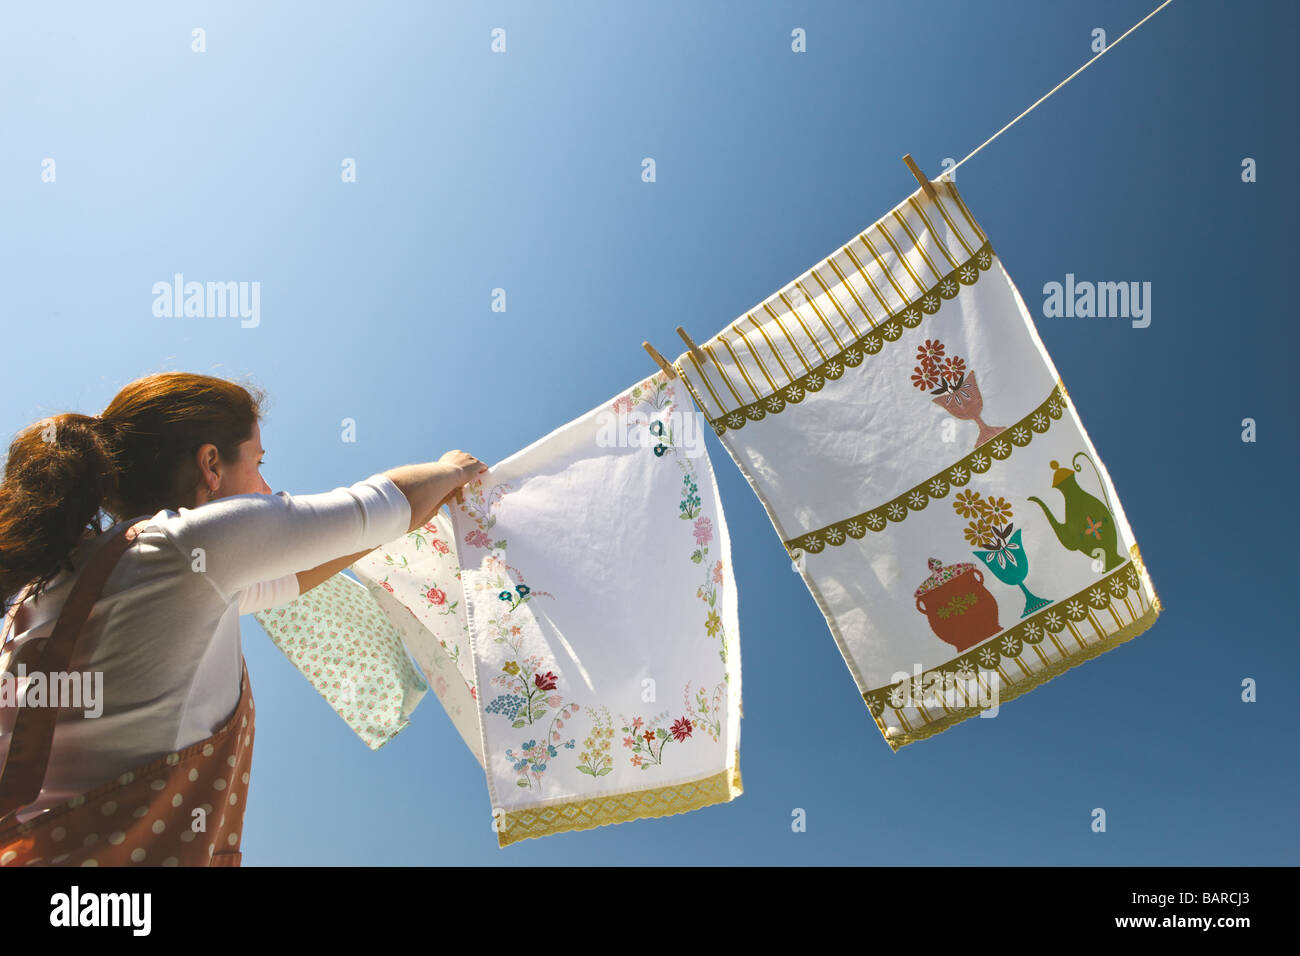 Environmentally friendly: Young woman pinning out colorful washing drying in the wind under a deep blue sky. Stock Photo